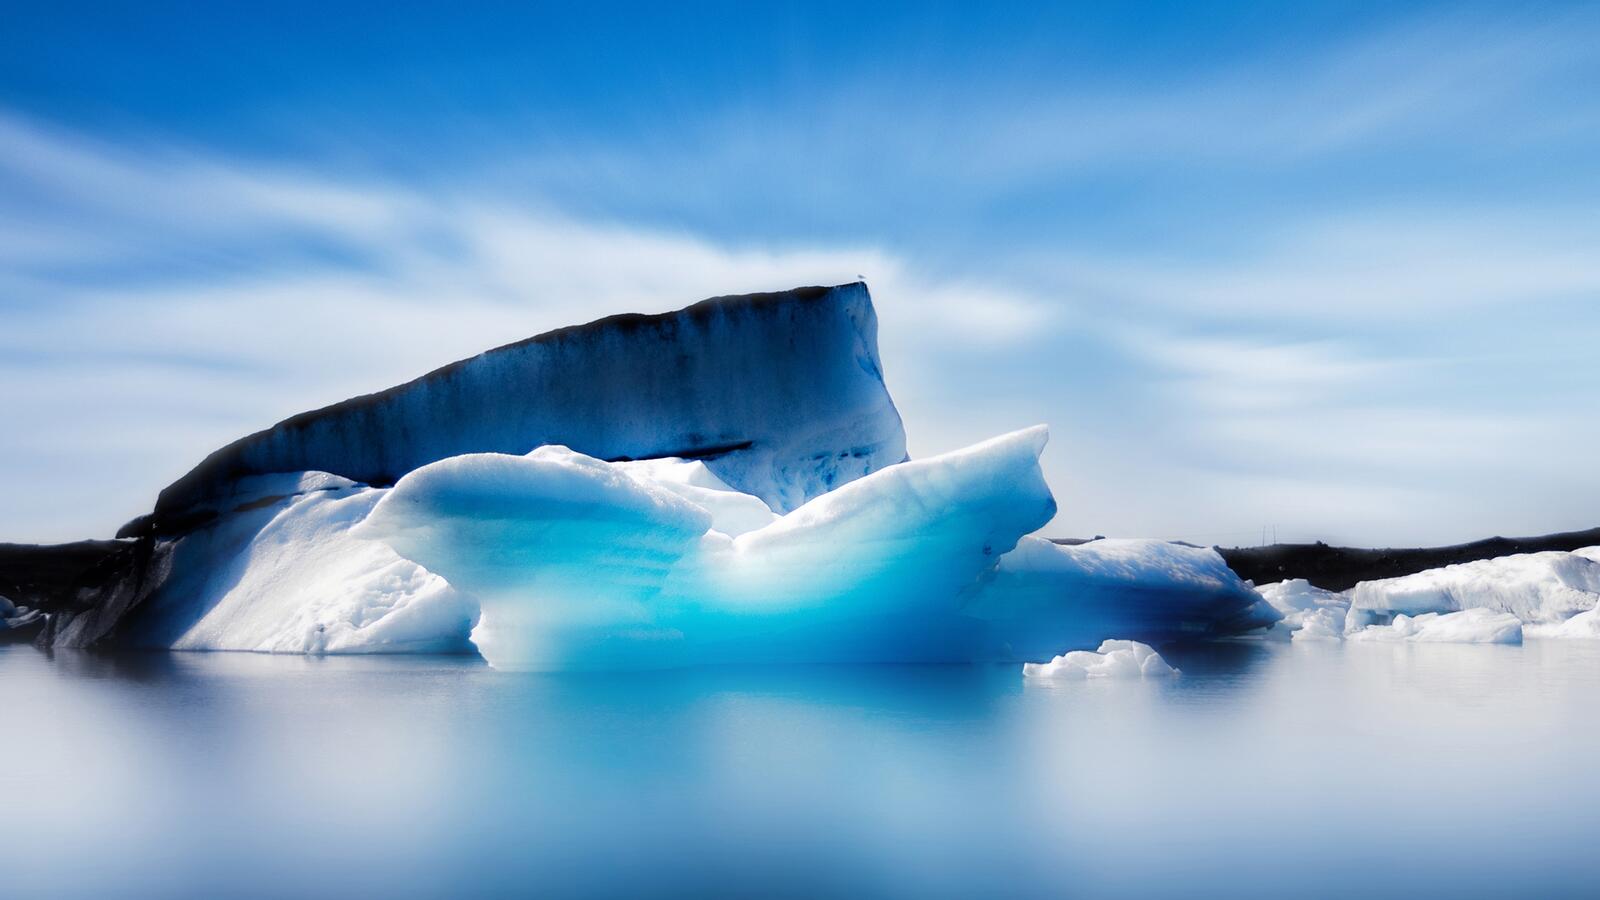 Free photo A large ice floe in the ocean